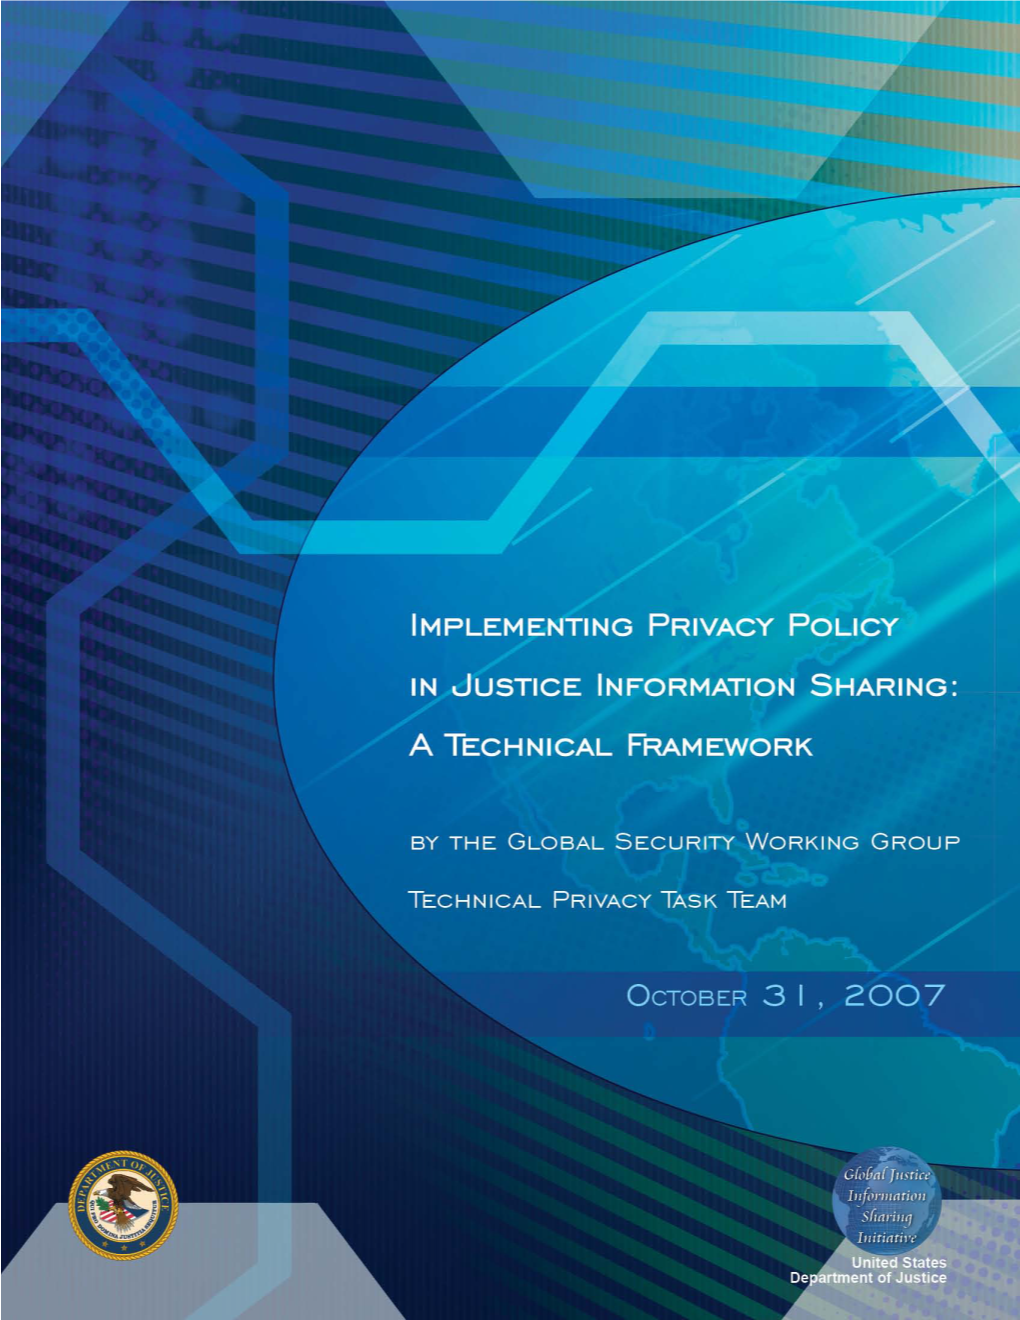 Implementing Privacy Policy in Justice Information October 31, 2007 Sharing: a Technical Framework Version 1.0